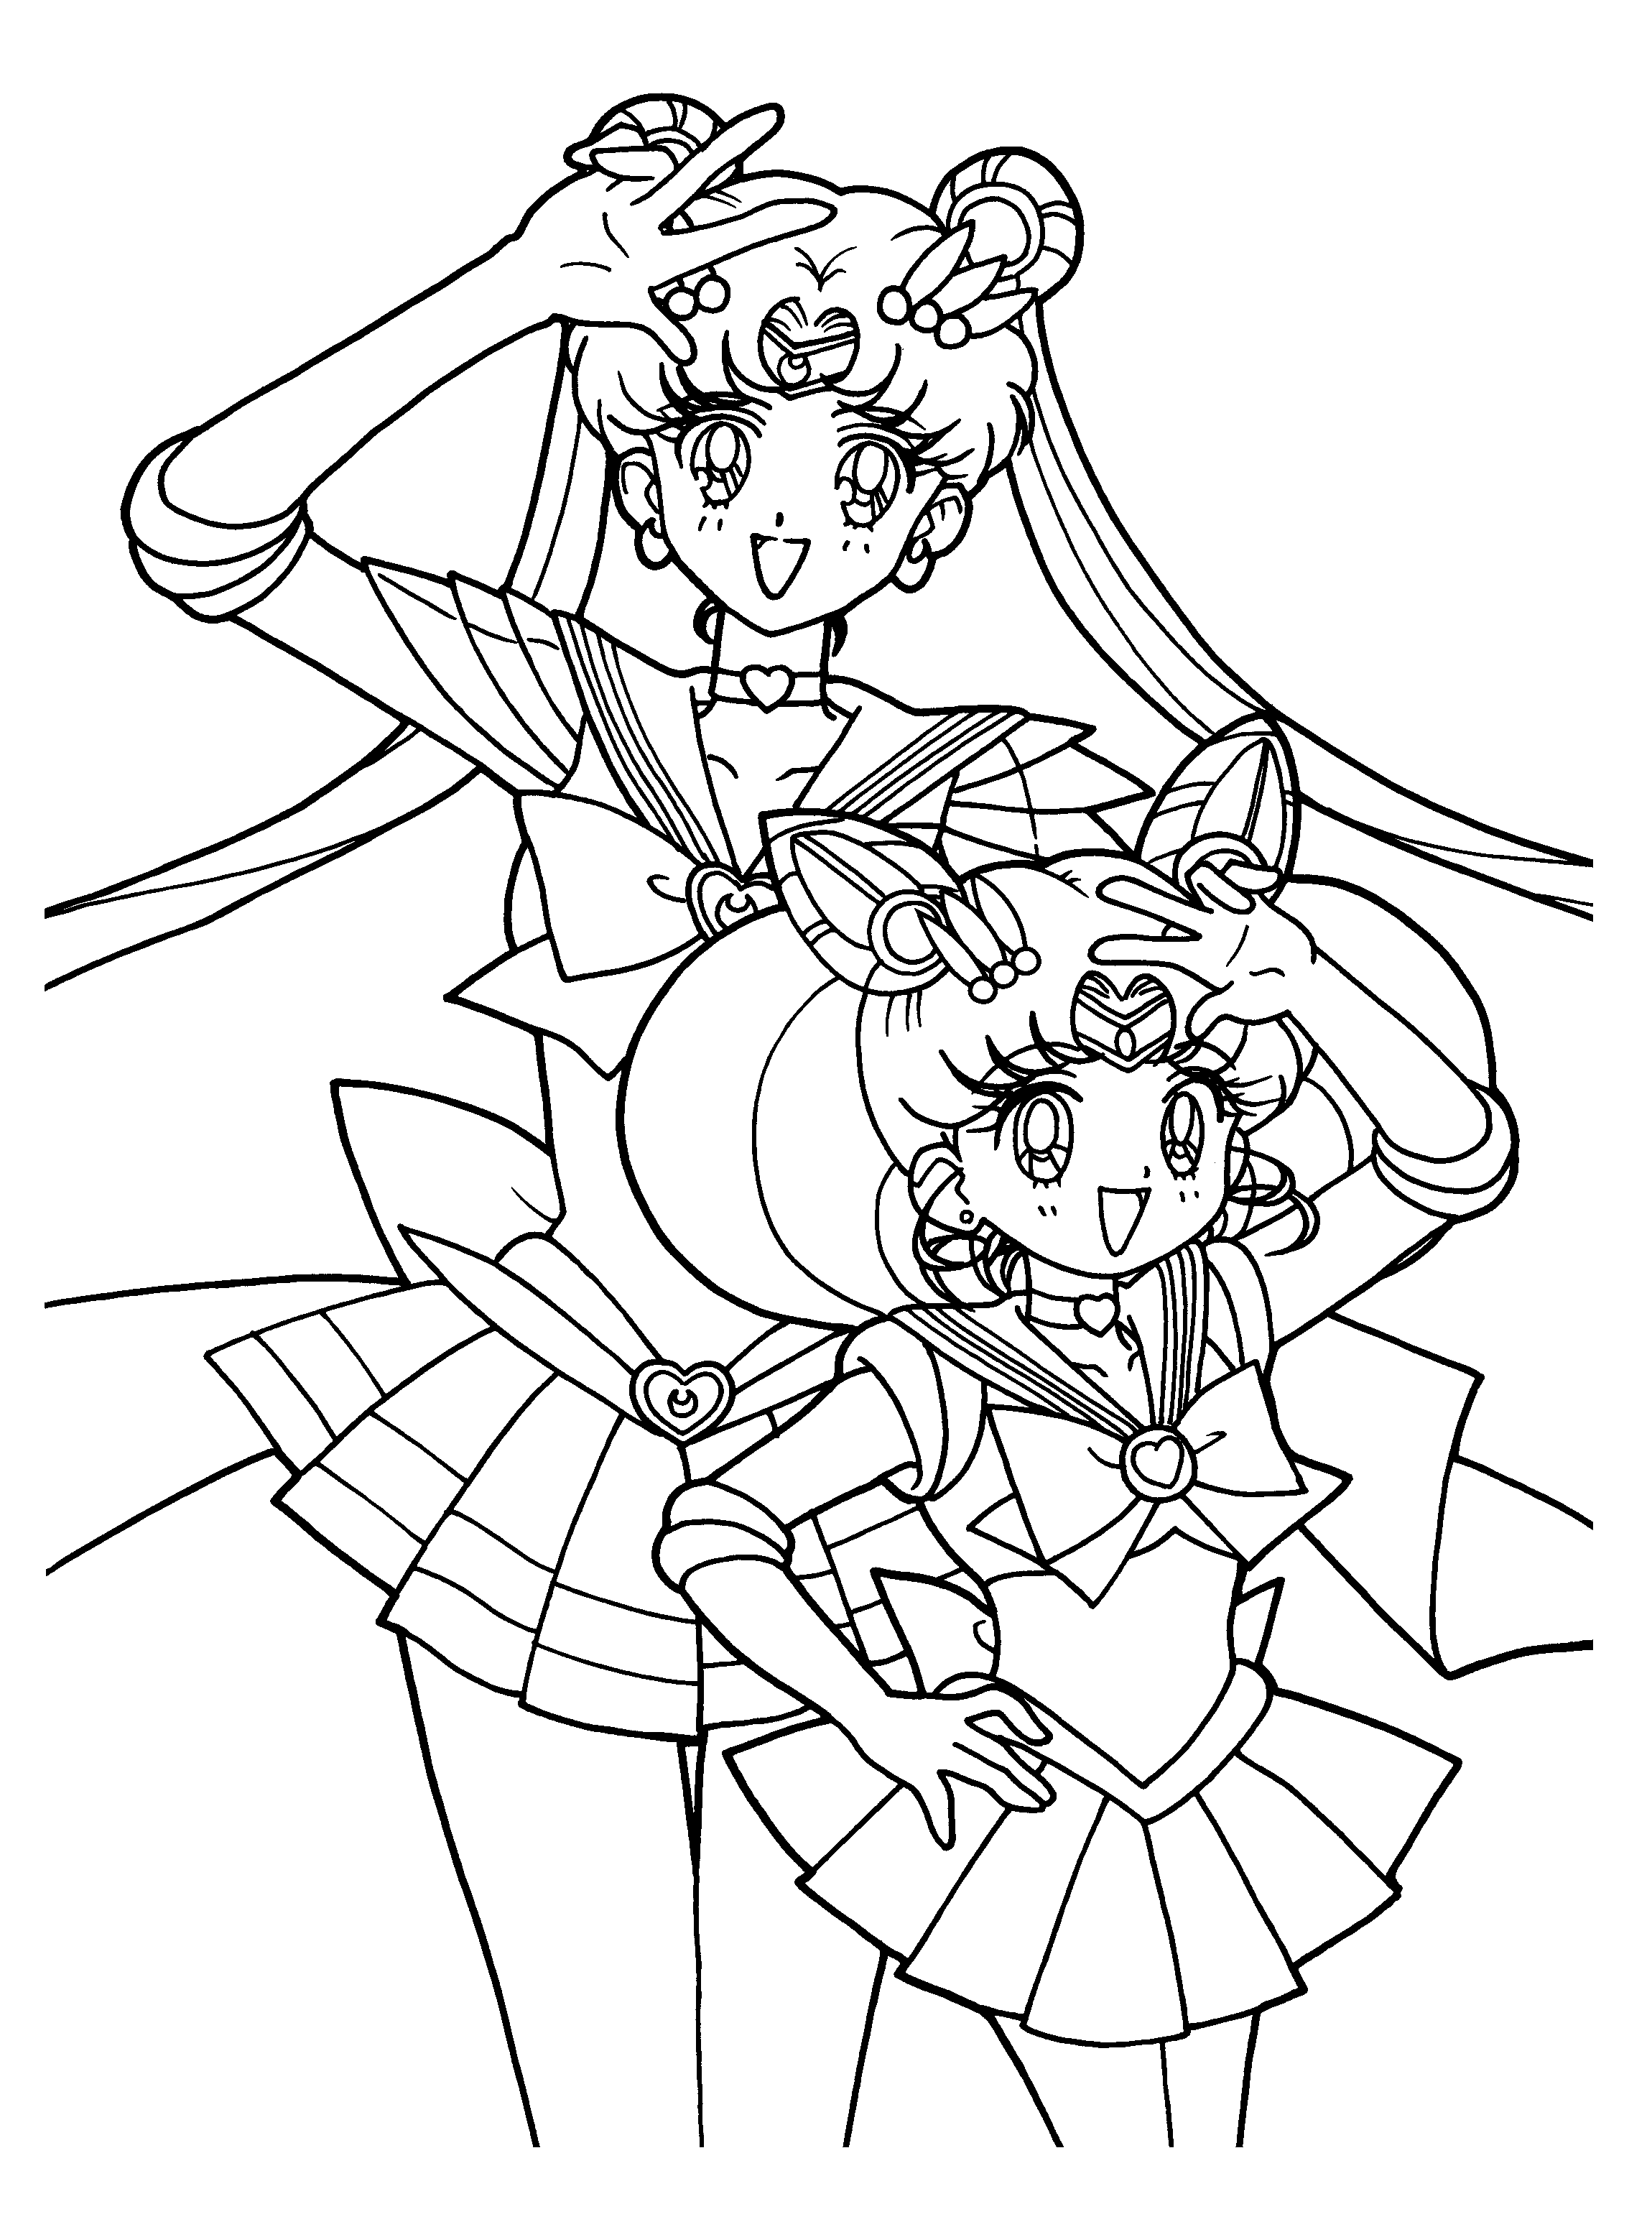 sailor moon coloring pages | Only Coloring Pages